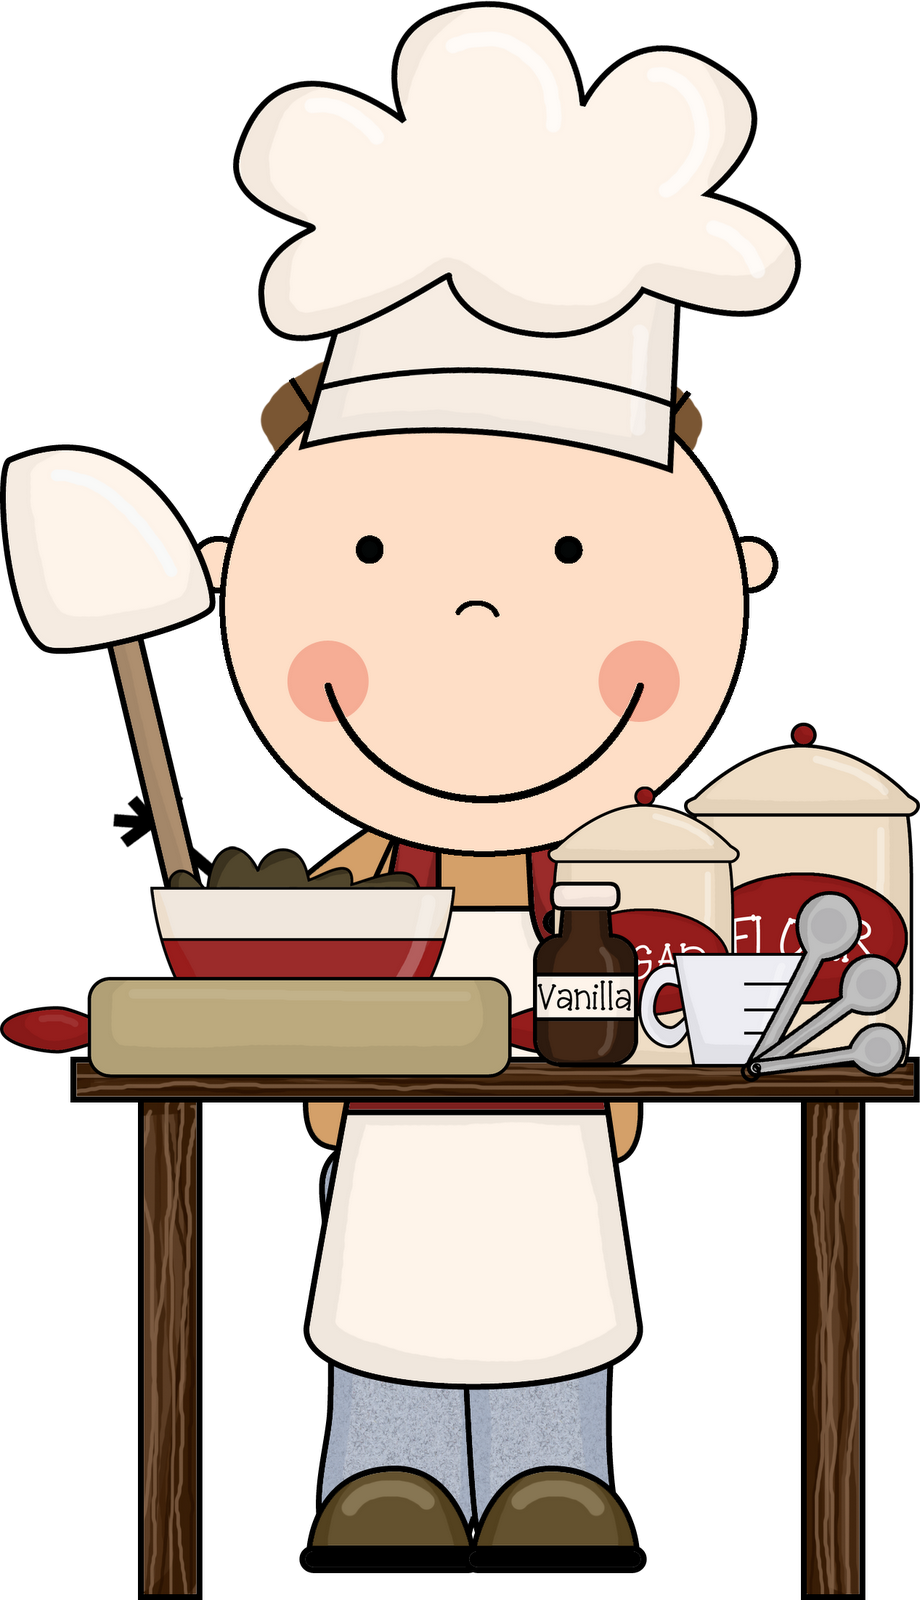 flameless cooking items clipart